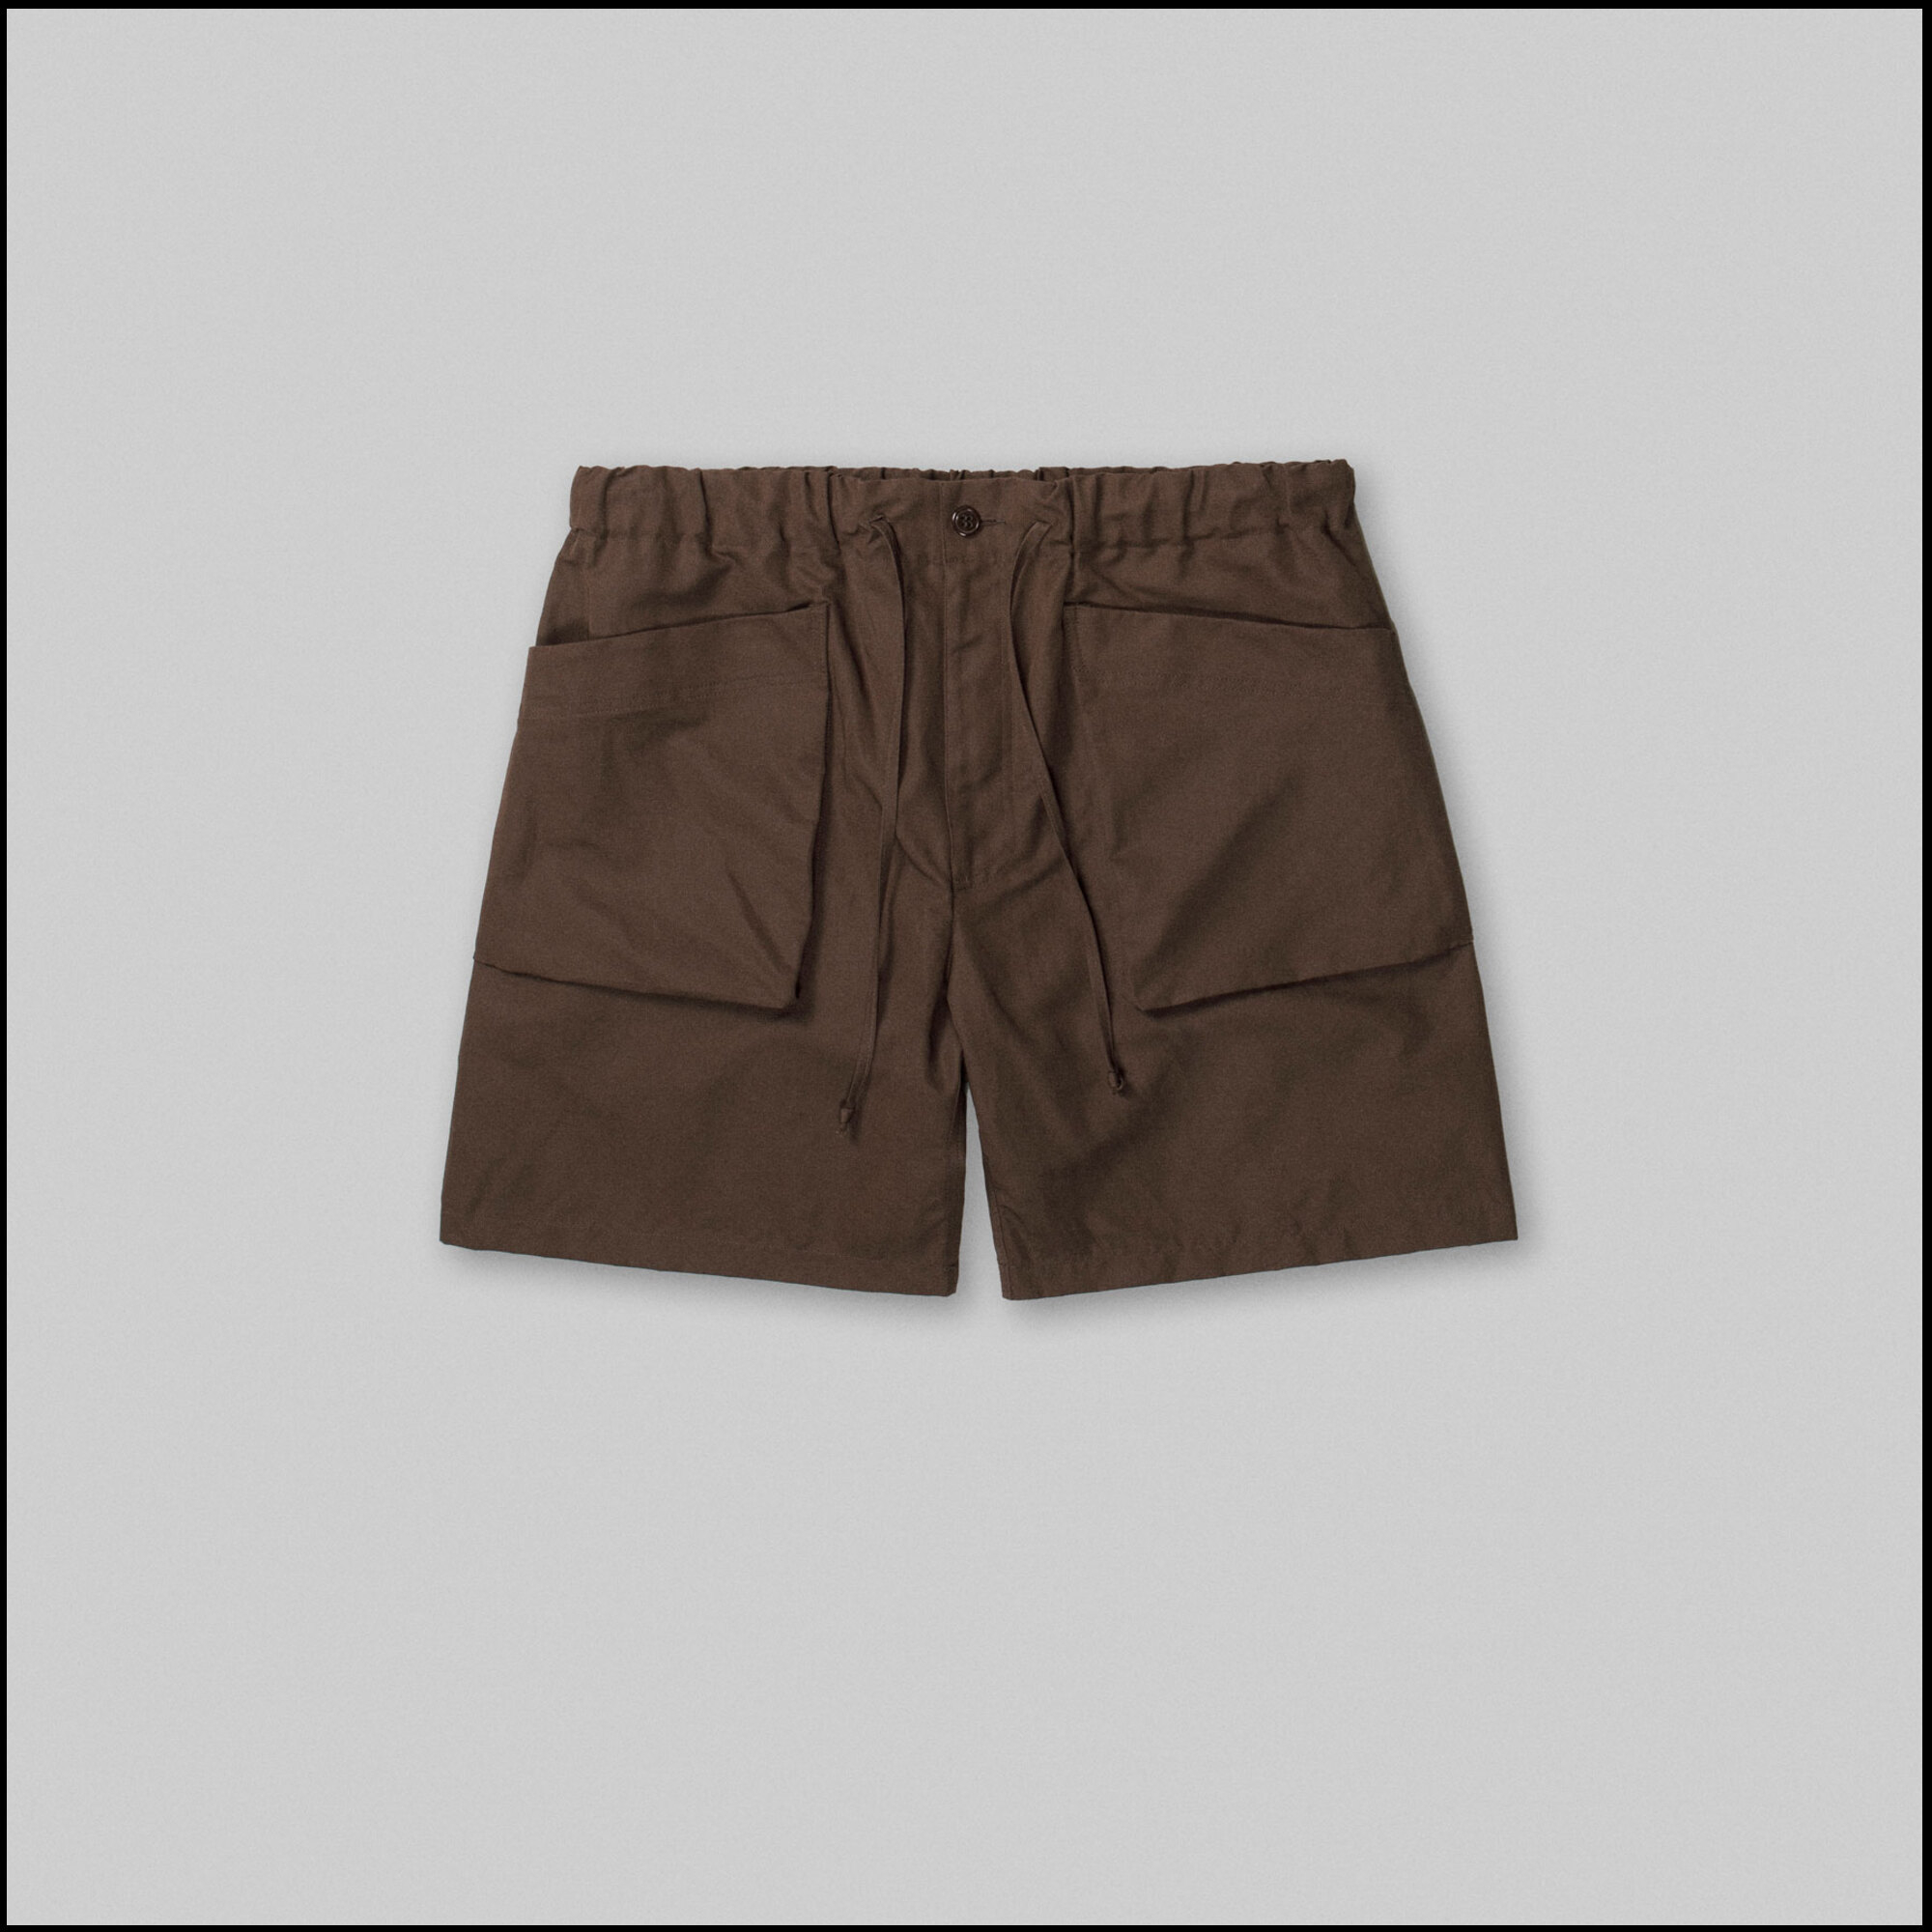 CARGO Shorts by Arpenteur in Brown color